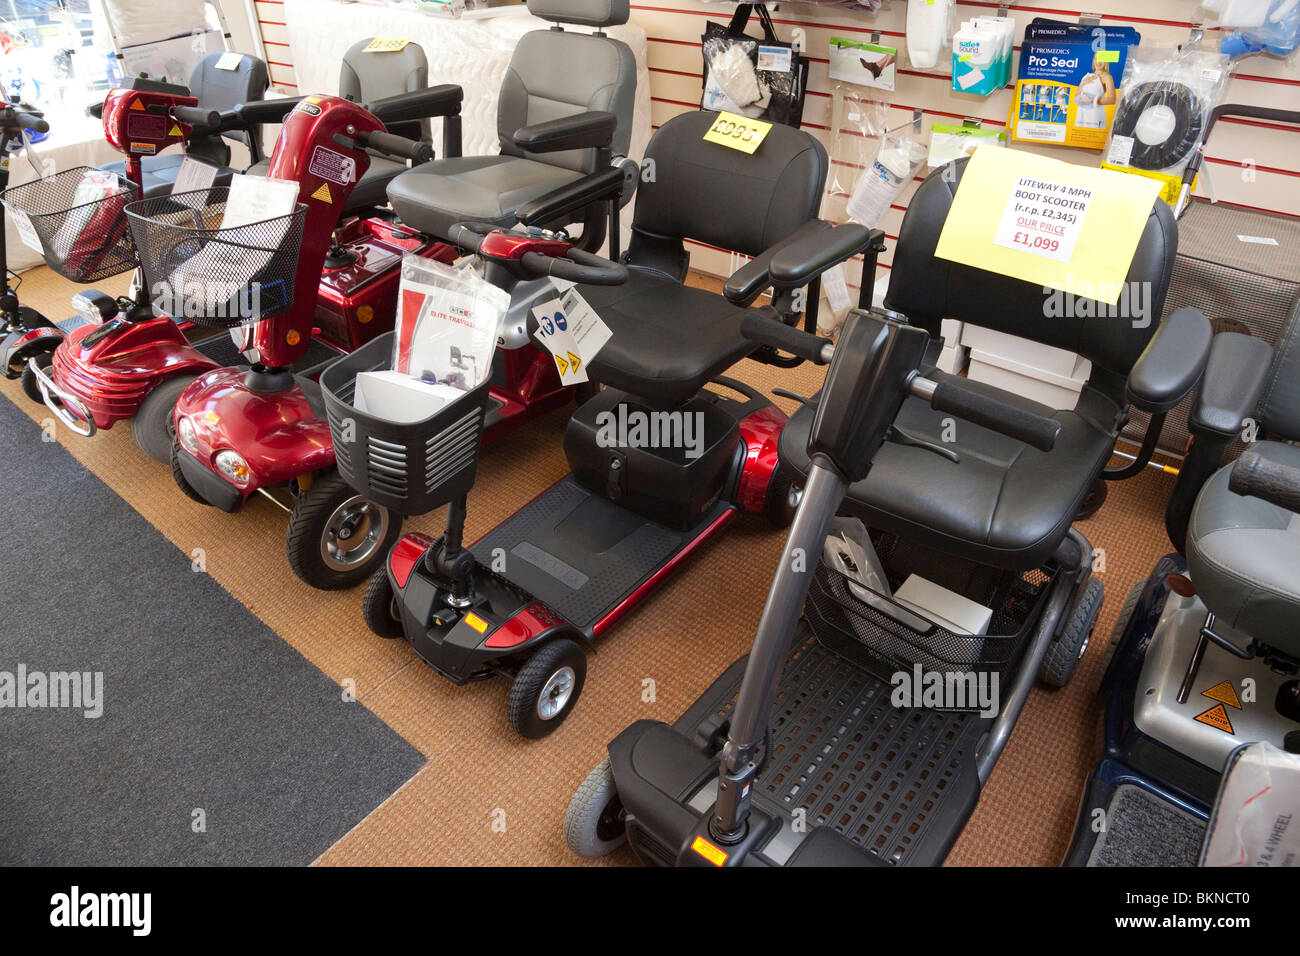 mobility buggies / scooters for old and disabled people Stock Photo